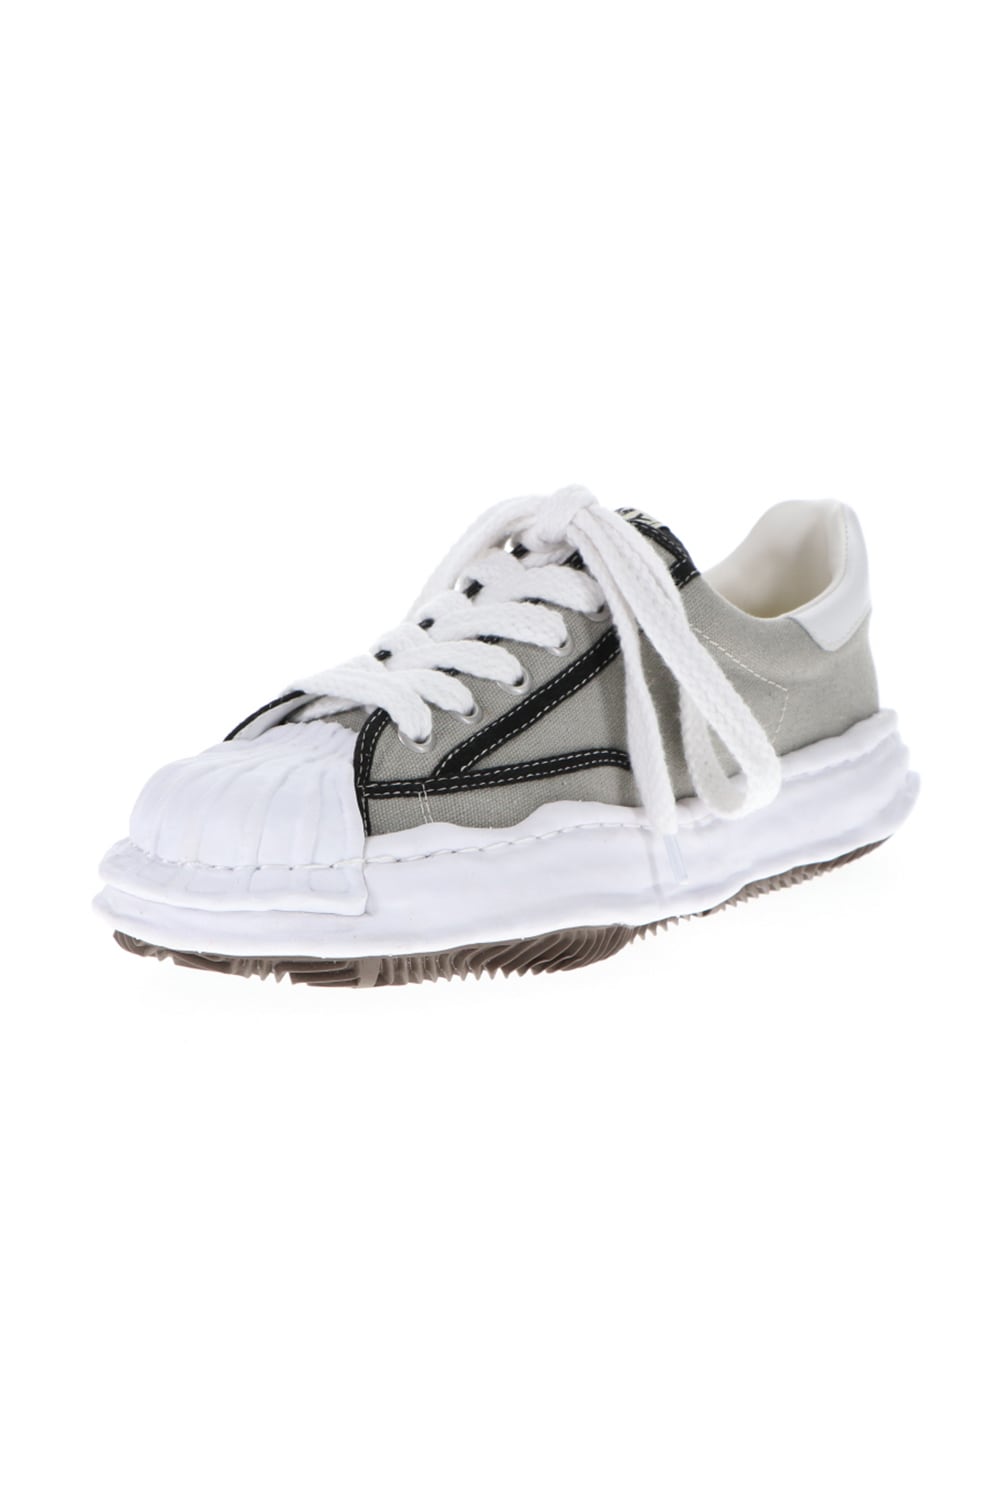 -BLAKEY Low- Original STC sole canvas Low-cut sneakers Gray Delivery November